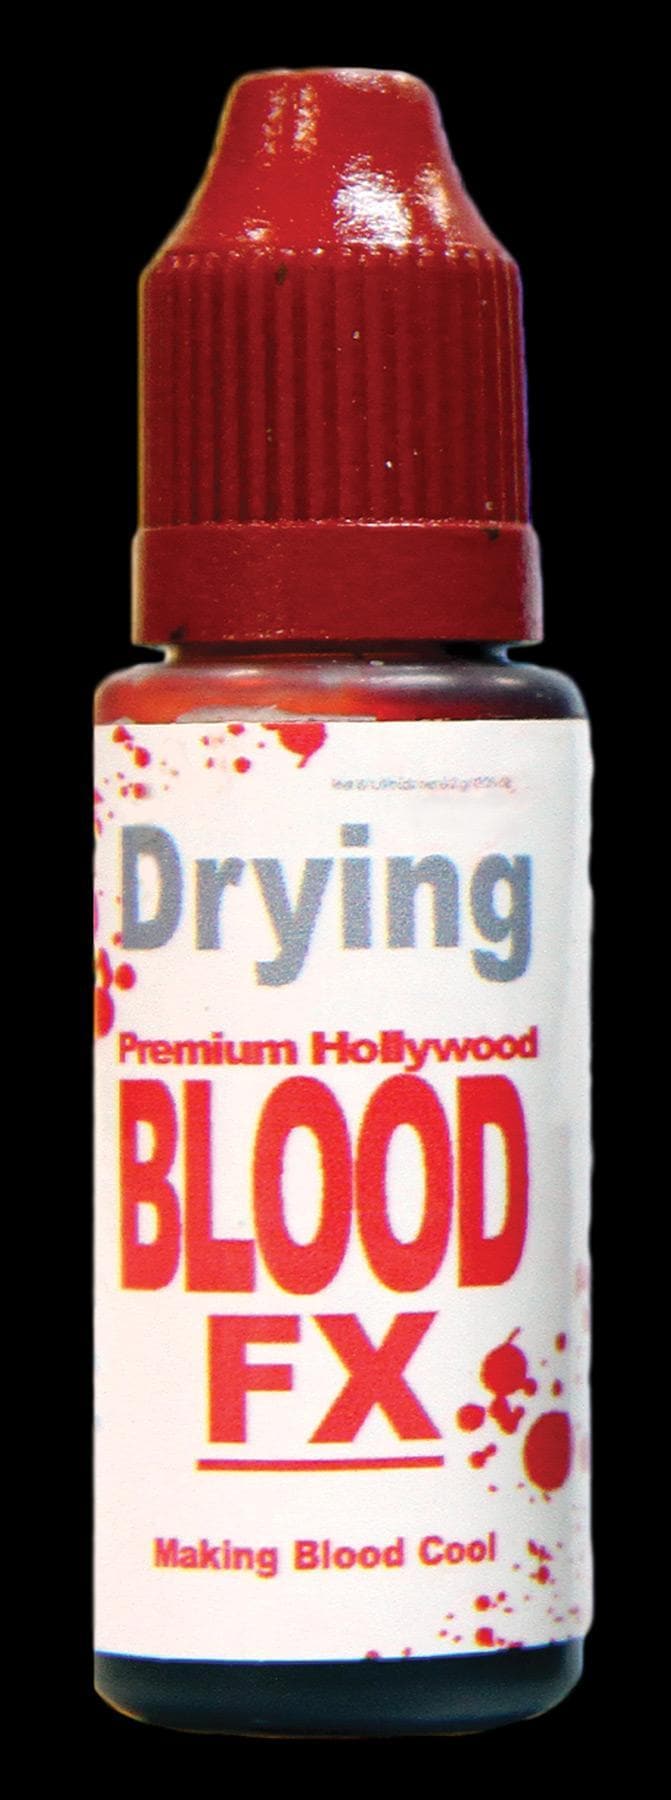 "Blood FX - Small Bottle" Halloween Costume Accessory